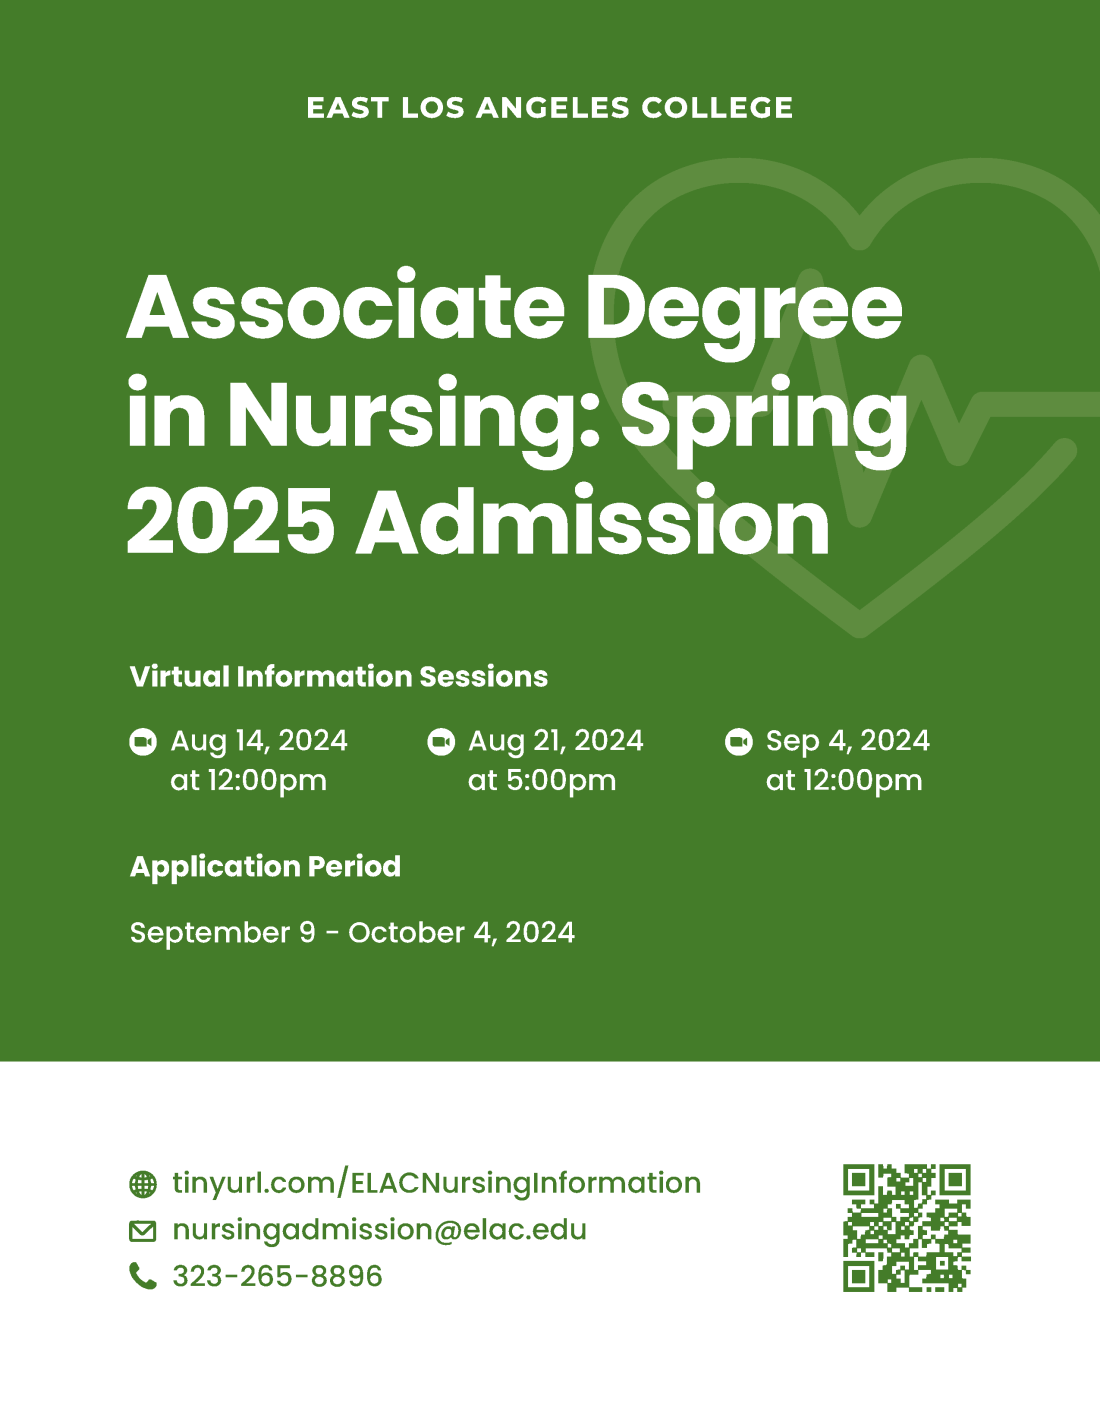 ELAC Associate Degree in Nursing Spring 2025 Admission Info Sessions.png